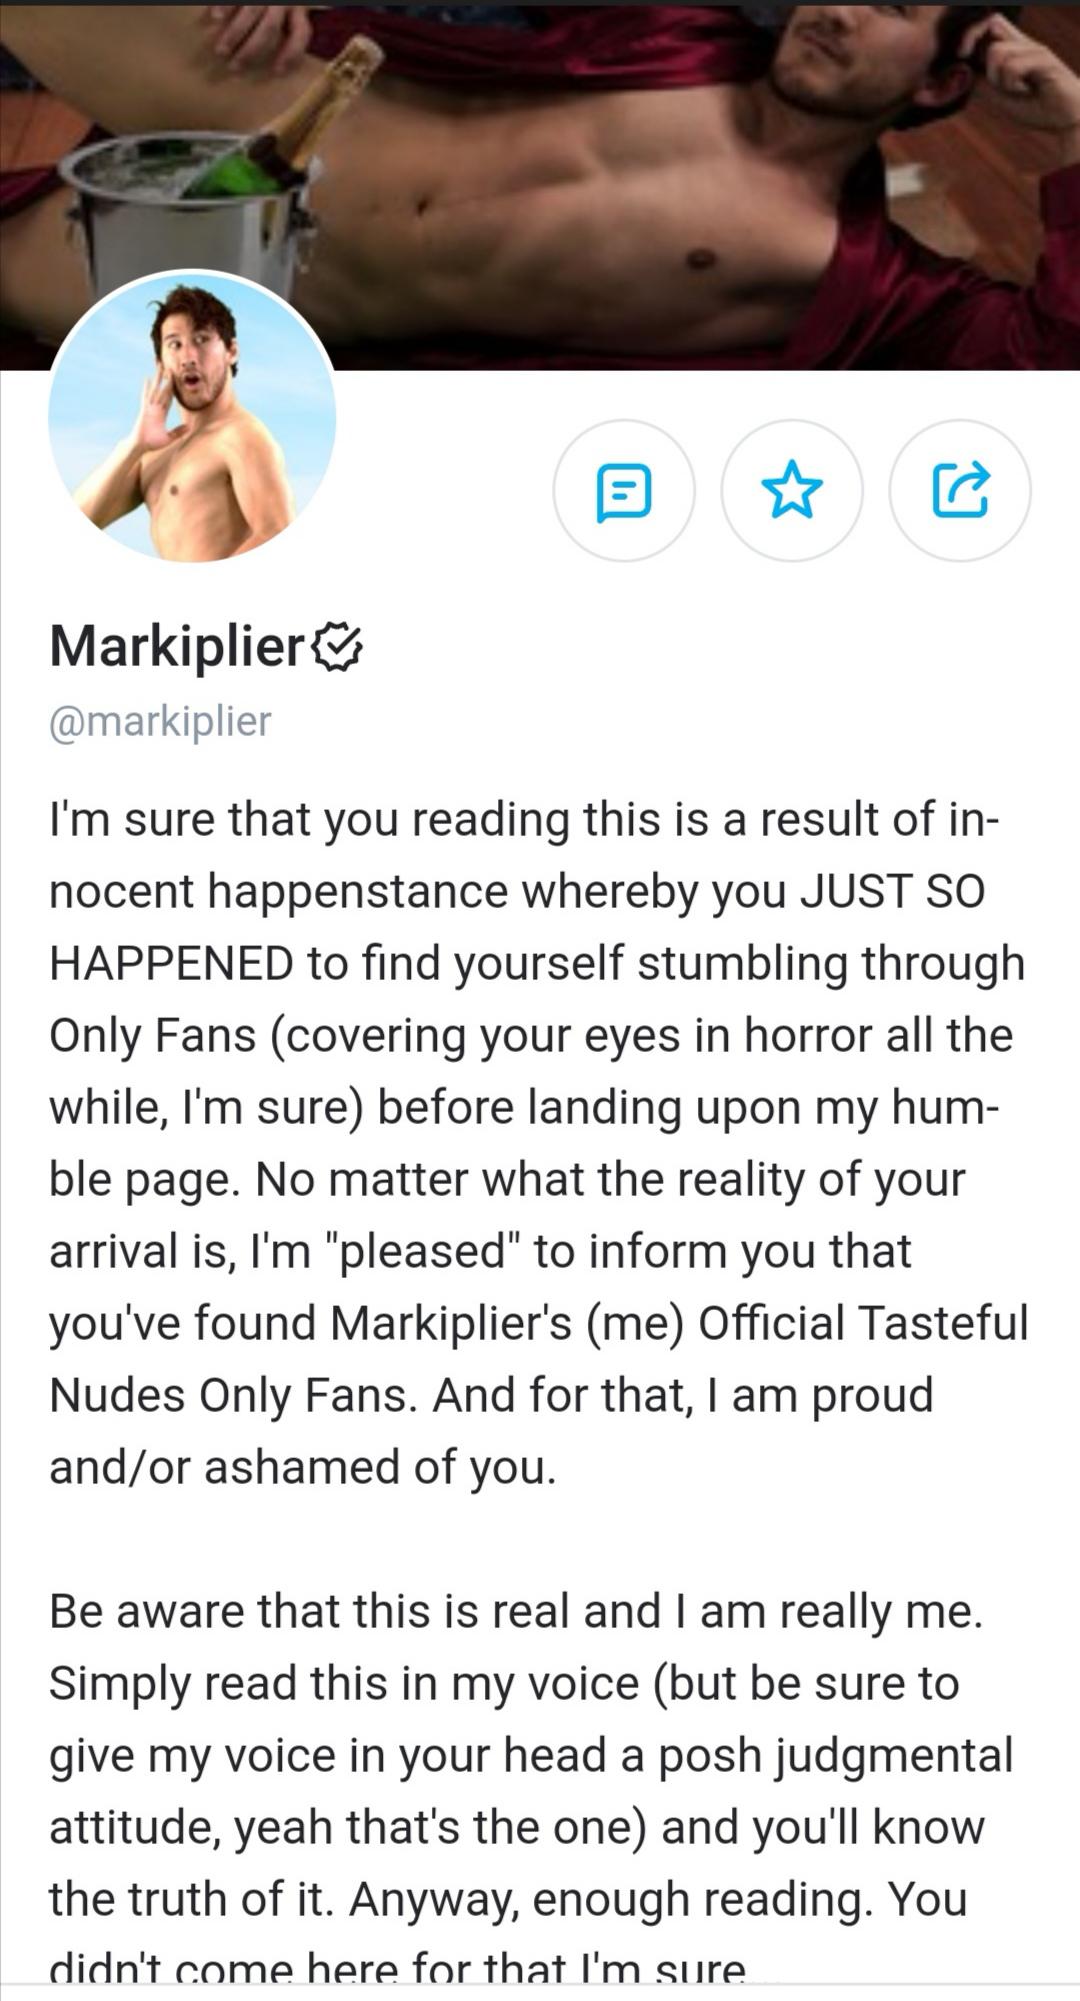 did markiplier actually make an onlyfans